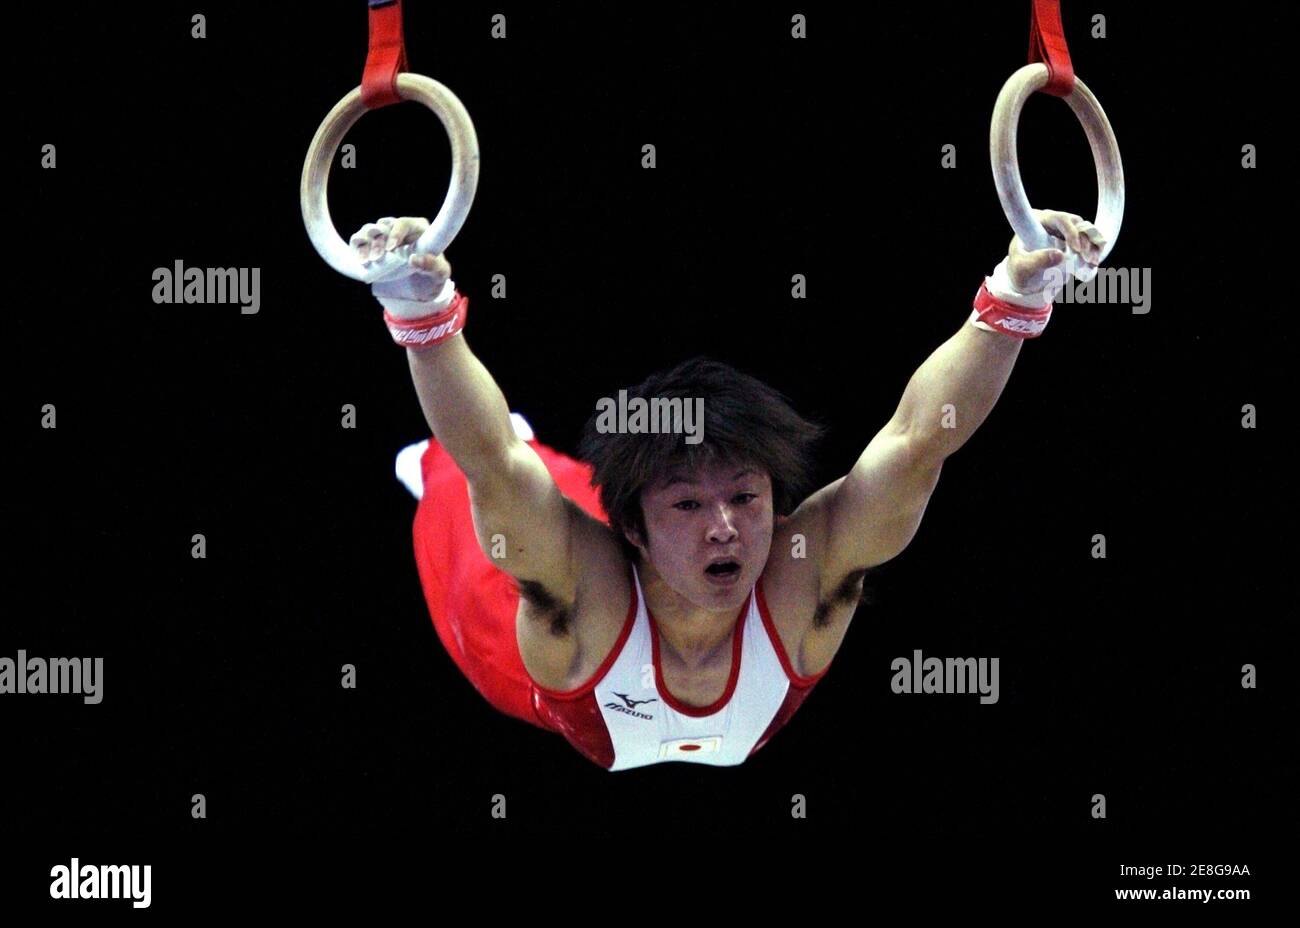 Kohei Uchimura from Japan performs his routine on the rings during the qualifying round of the the Gymnastics World Championships at the O2 Arena in London October 13, 2009. REUTERS/Jerry Lampen (BRITAIN SPORT GYMNASTICS) Stock Photo